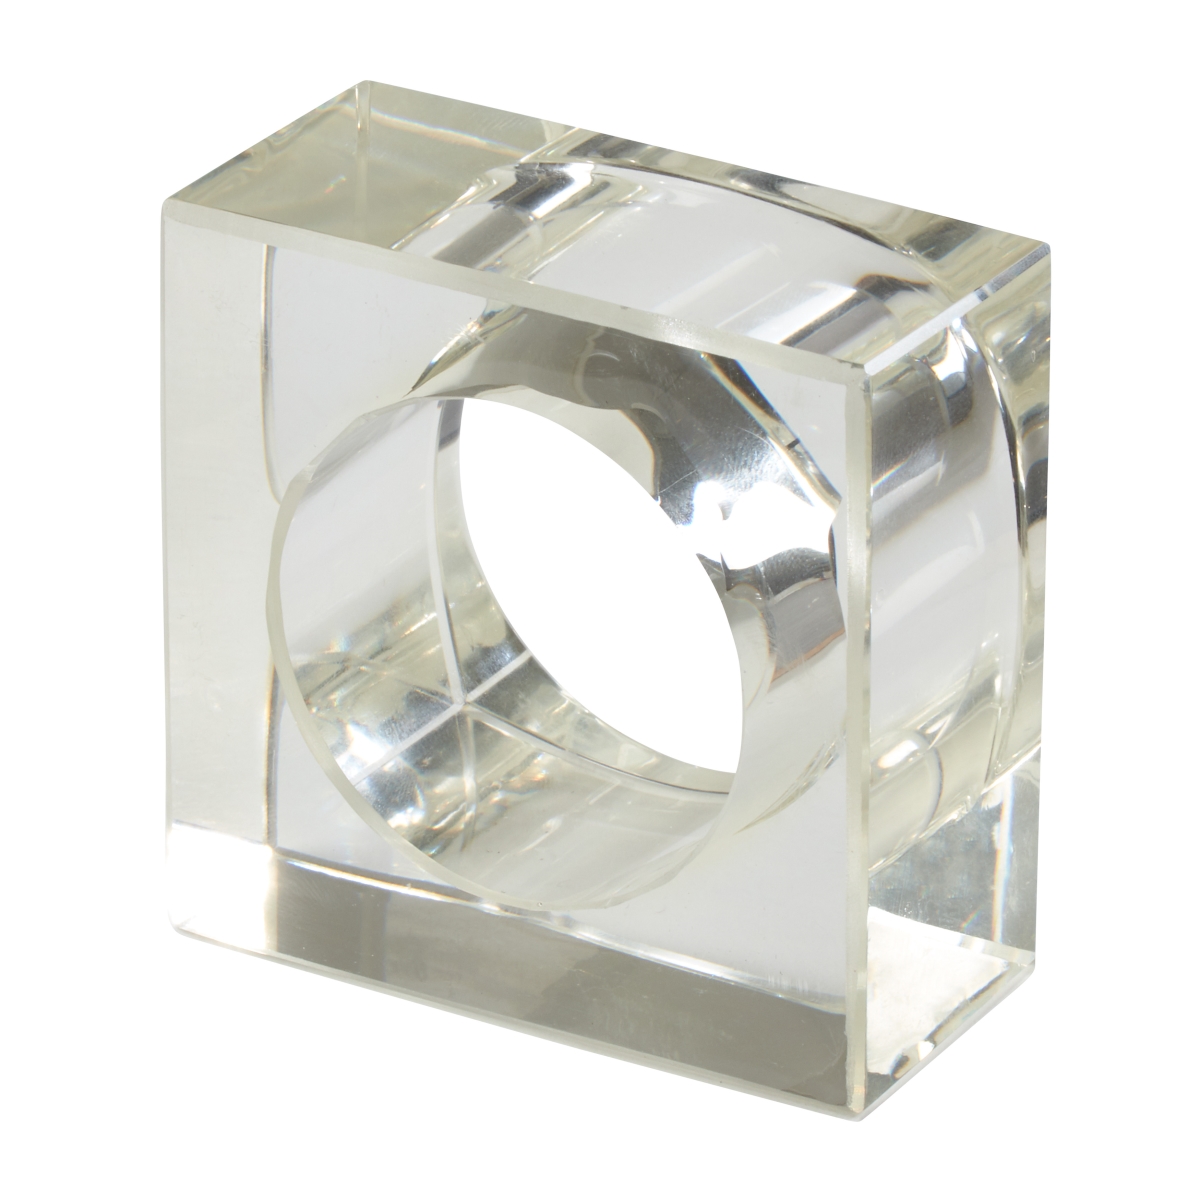 UPC 789323338617 product image for NR218.C Acrylic Napkin Ring with Square Design, Clear - Set of 4 | upcitemdb.com